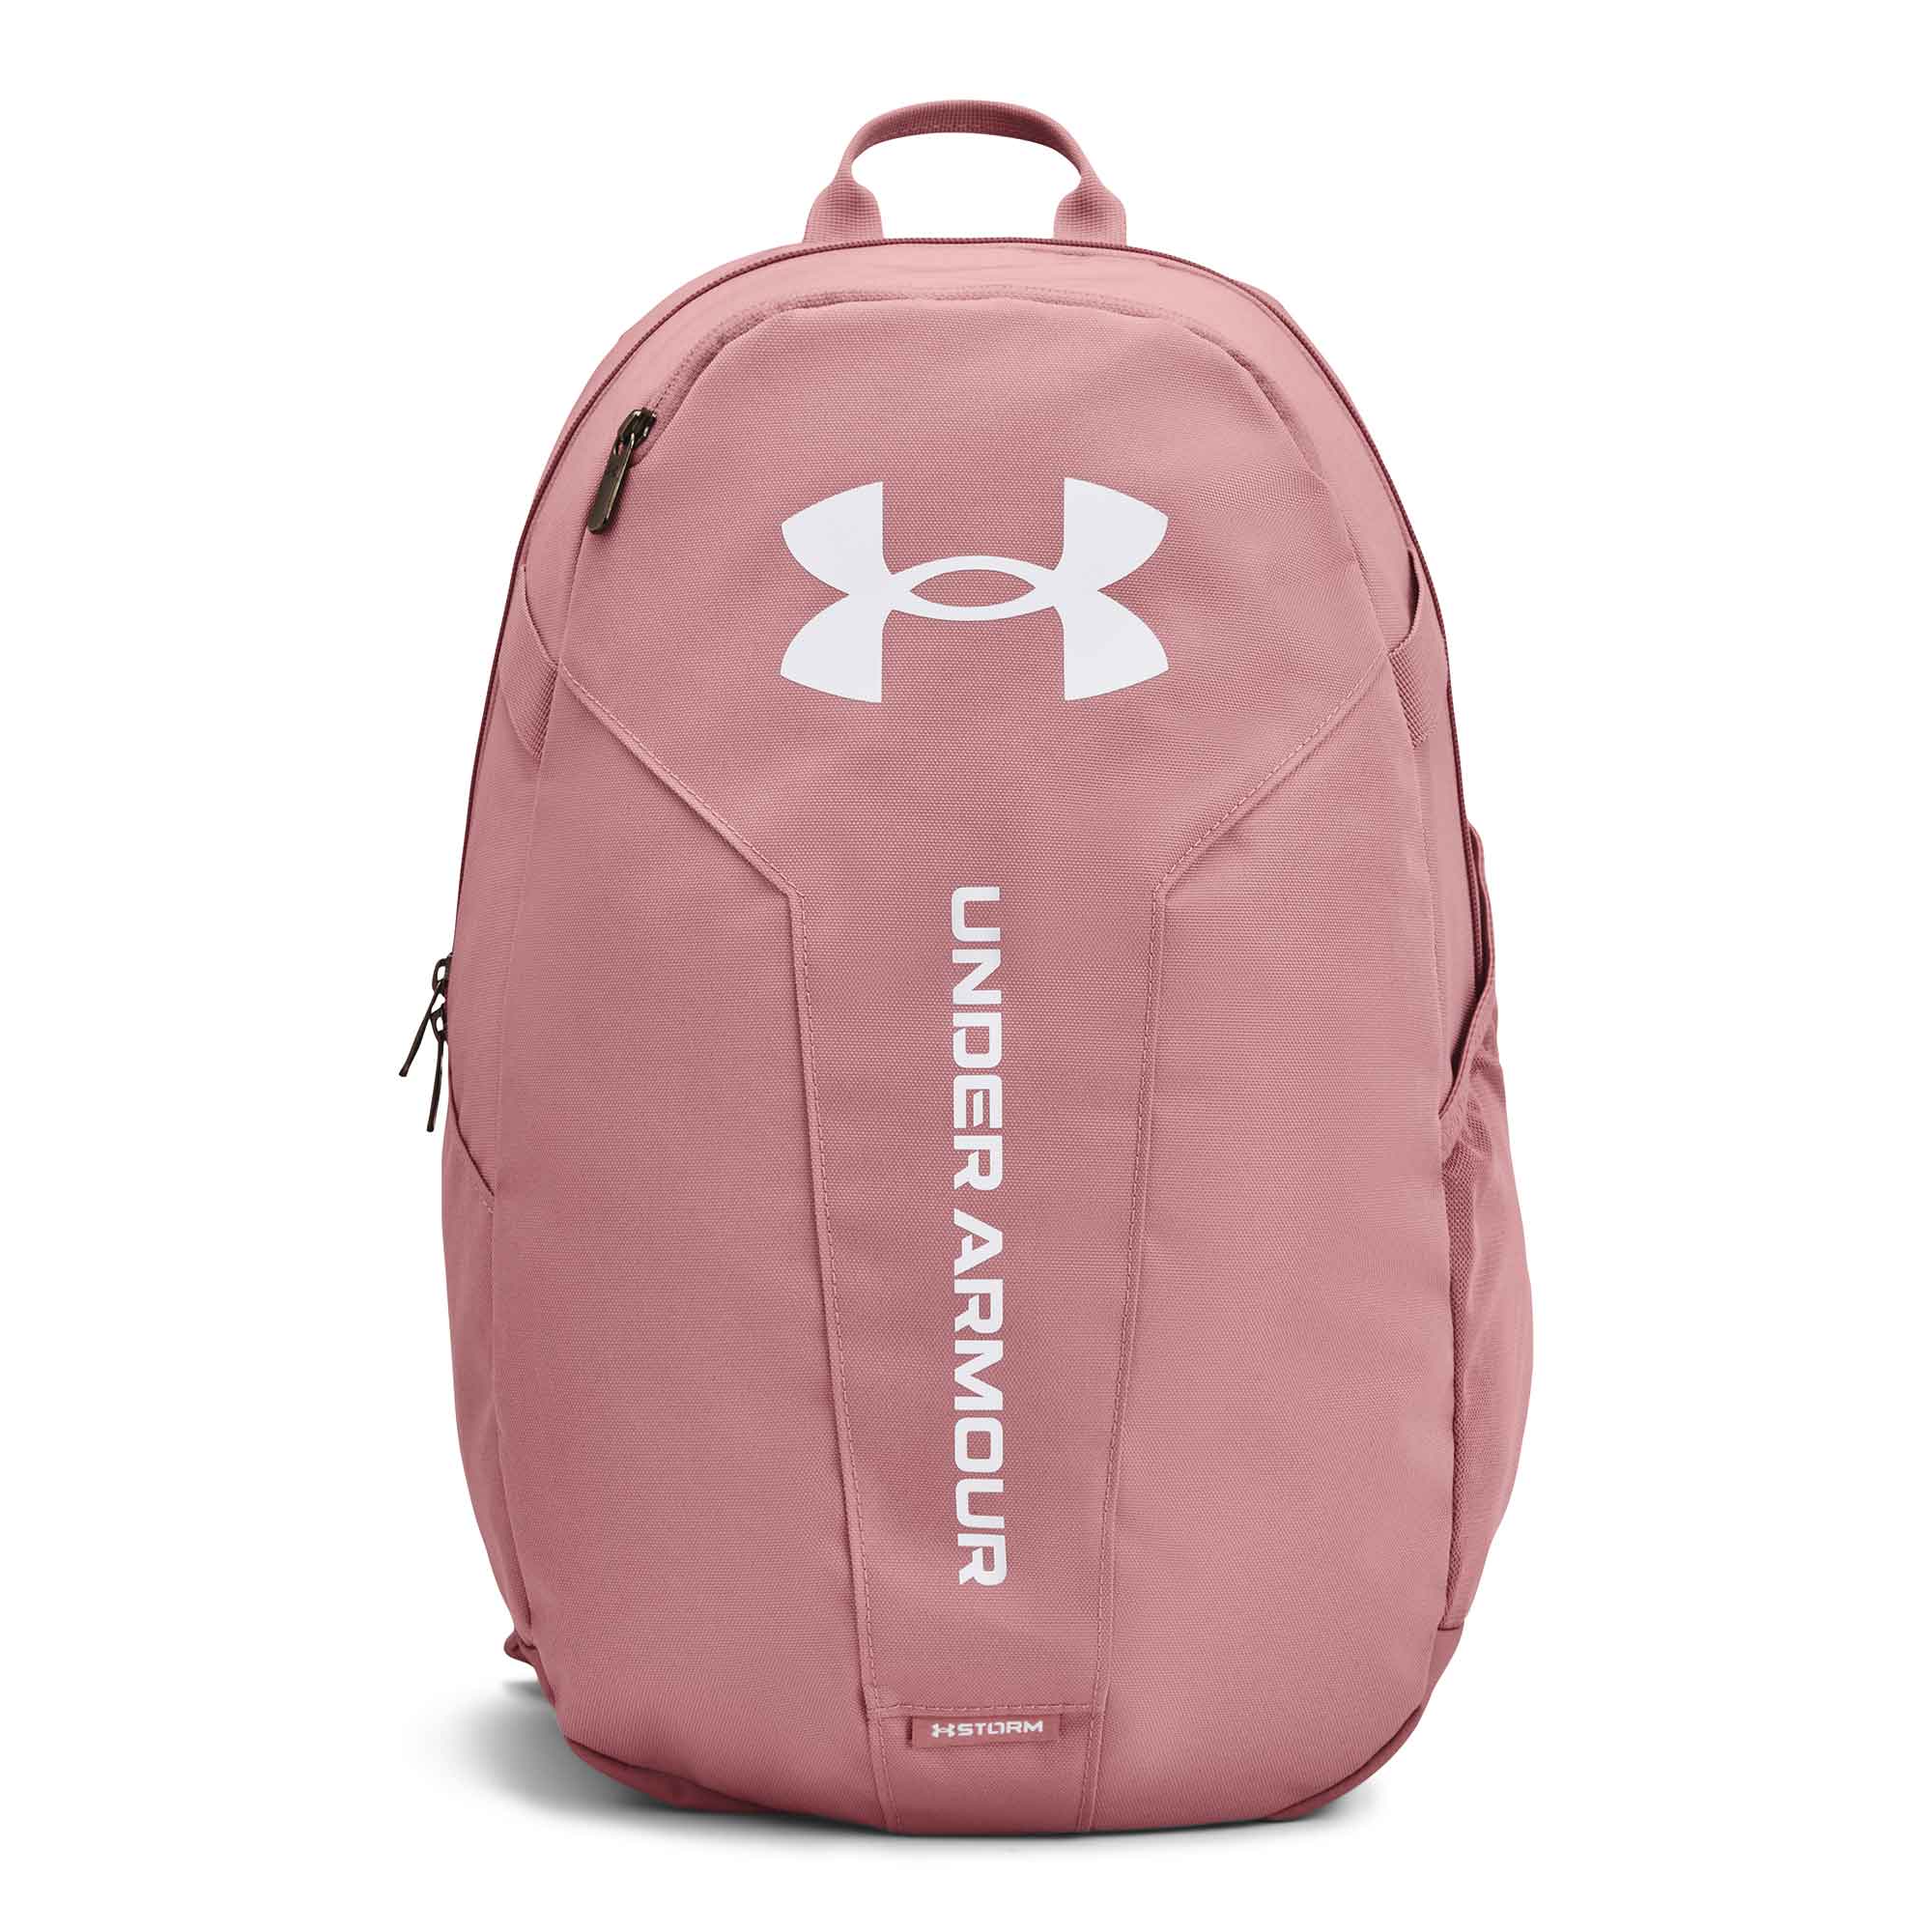 Under Armour Hustle Lite Backpack Pink/White 24 Litres